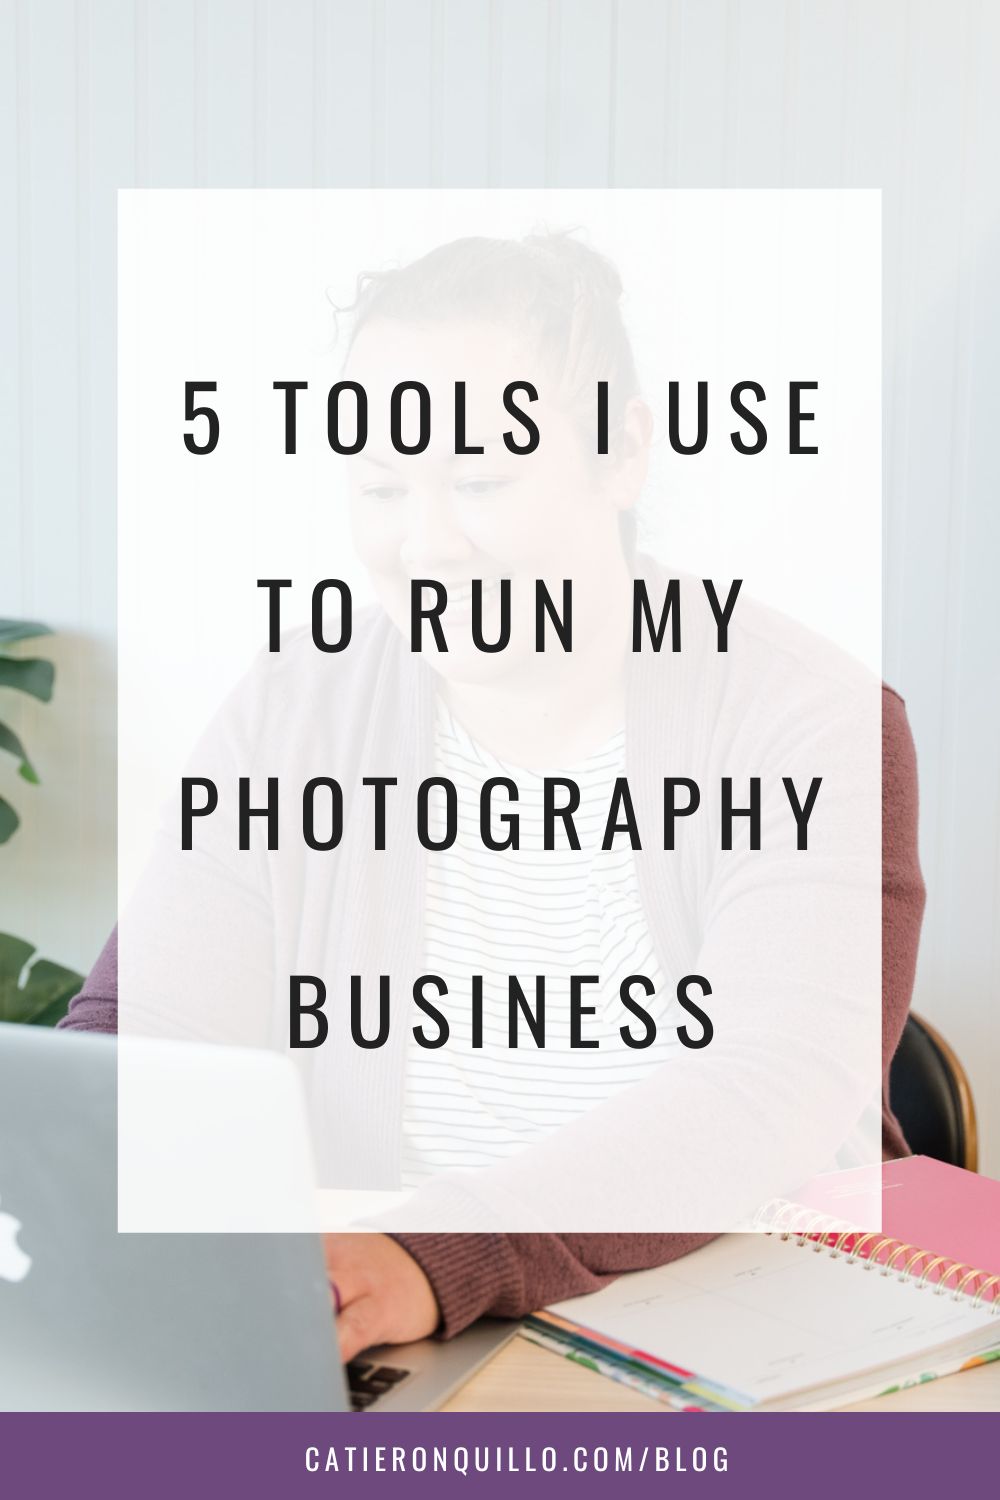 business tools for photography biz